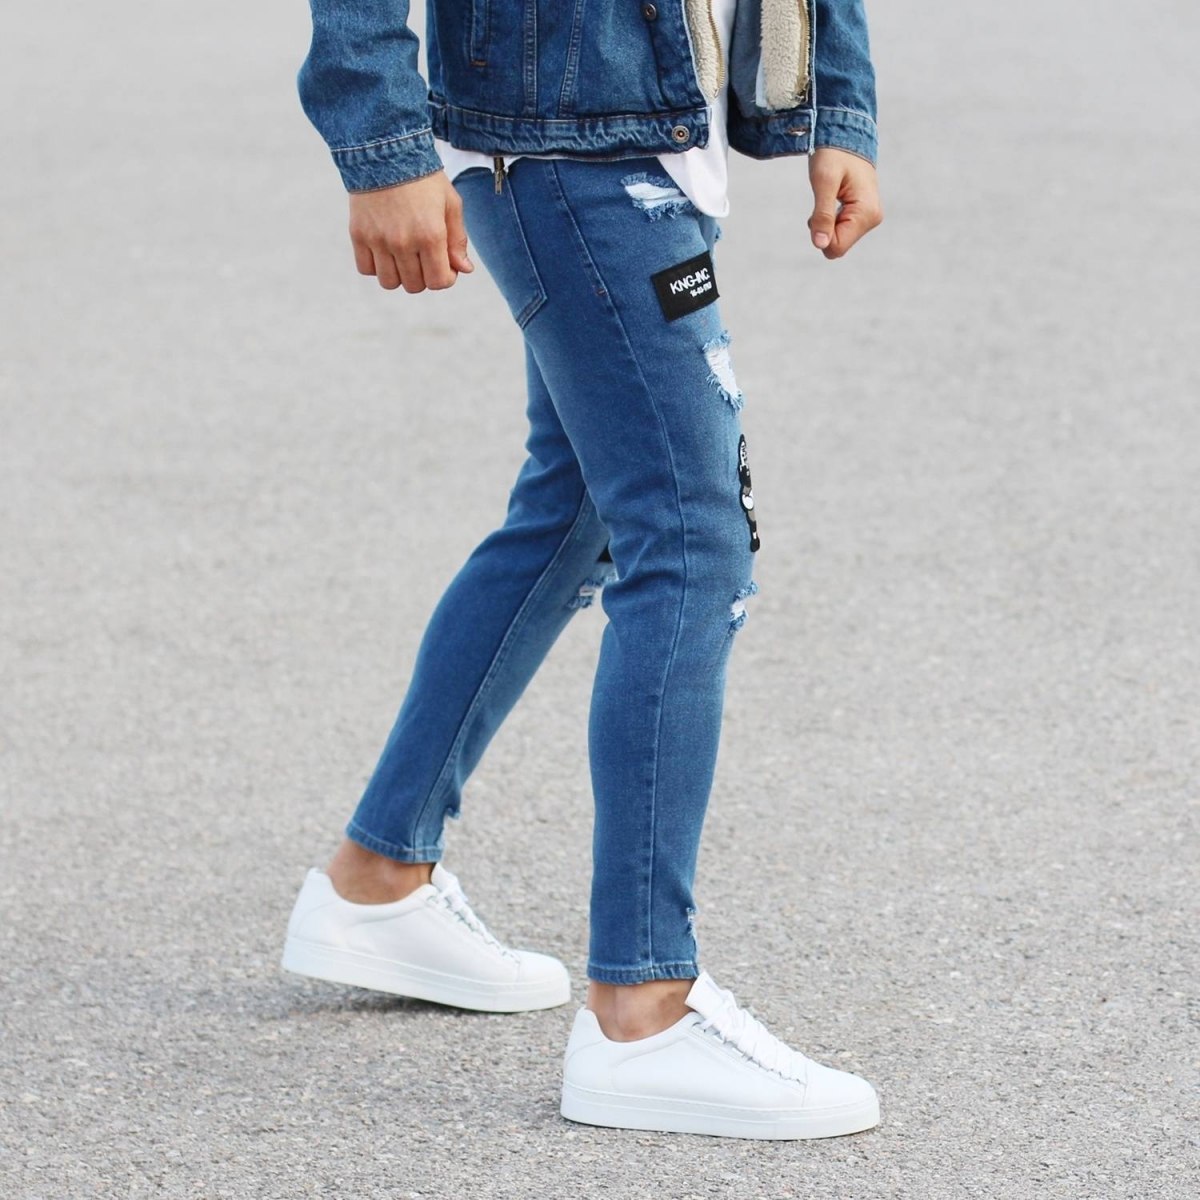 slim fit jeans with sneakers